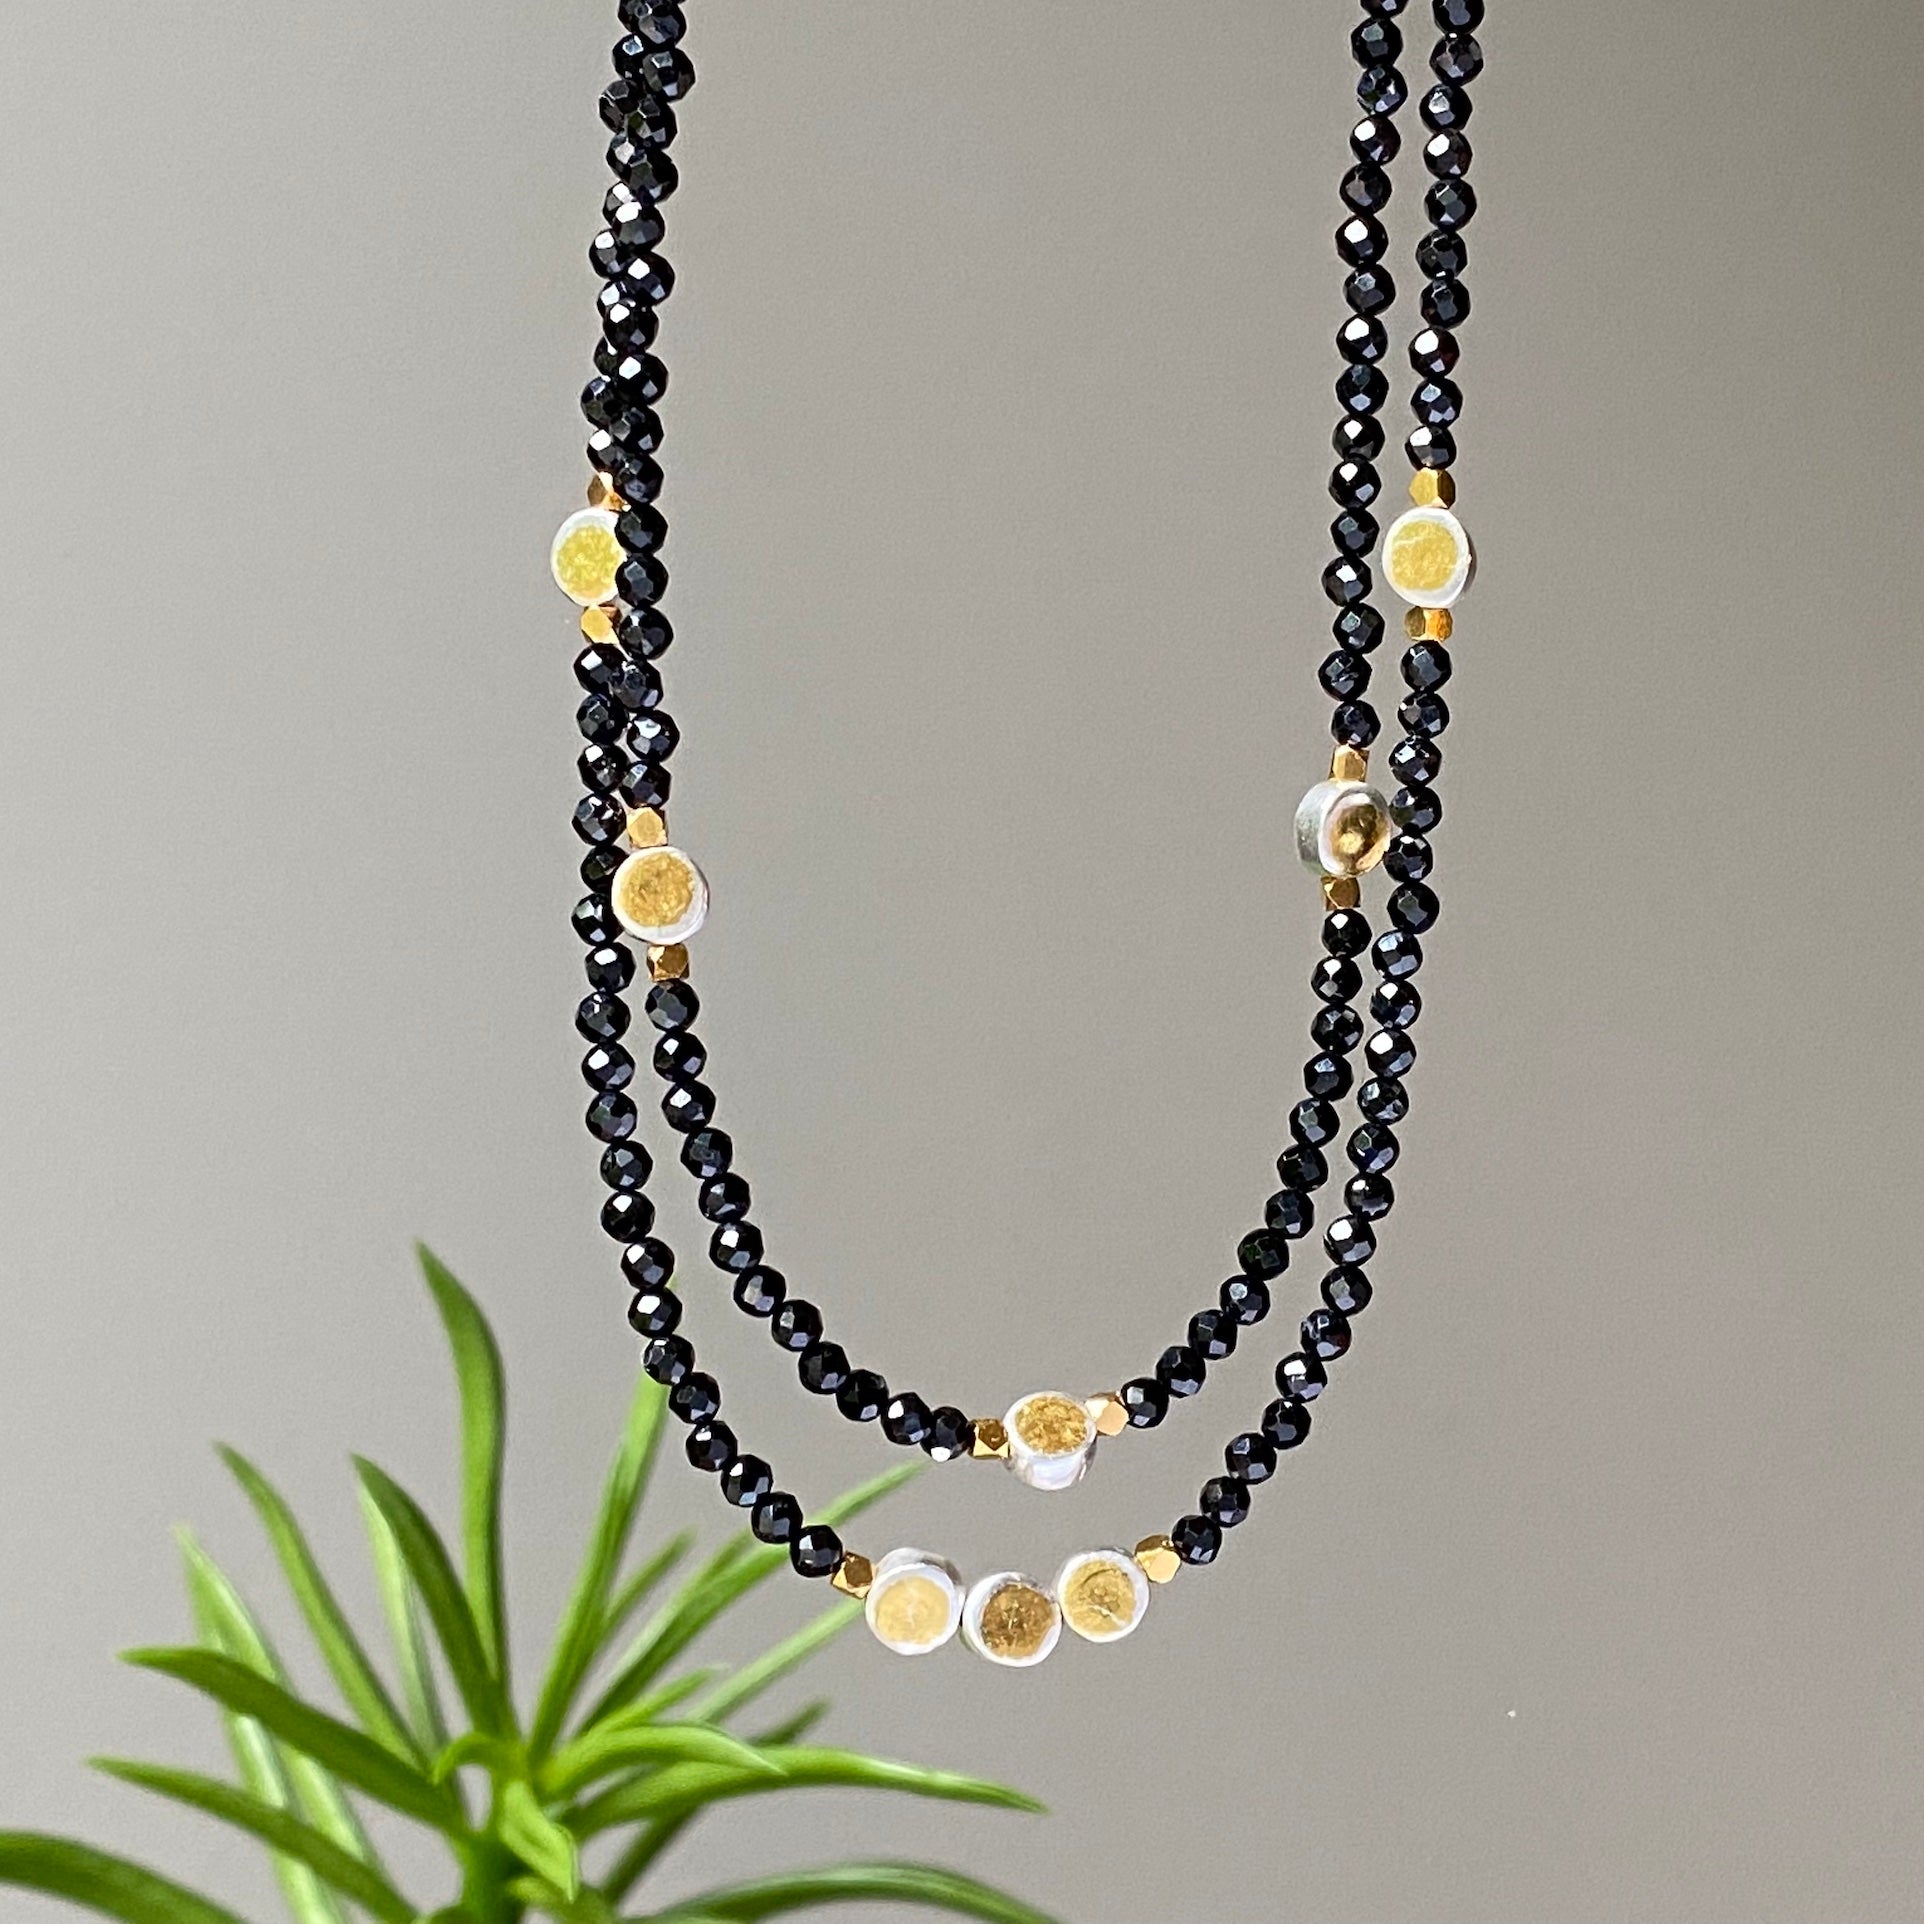 tiny bead, necklace, silver, gold, gemstone, black spinel, keum-boo